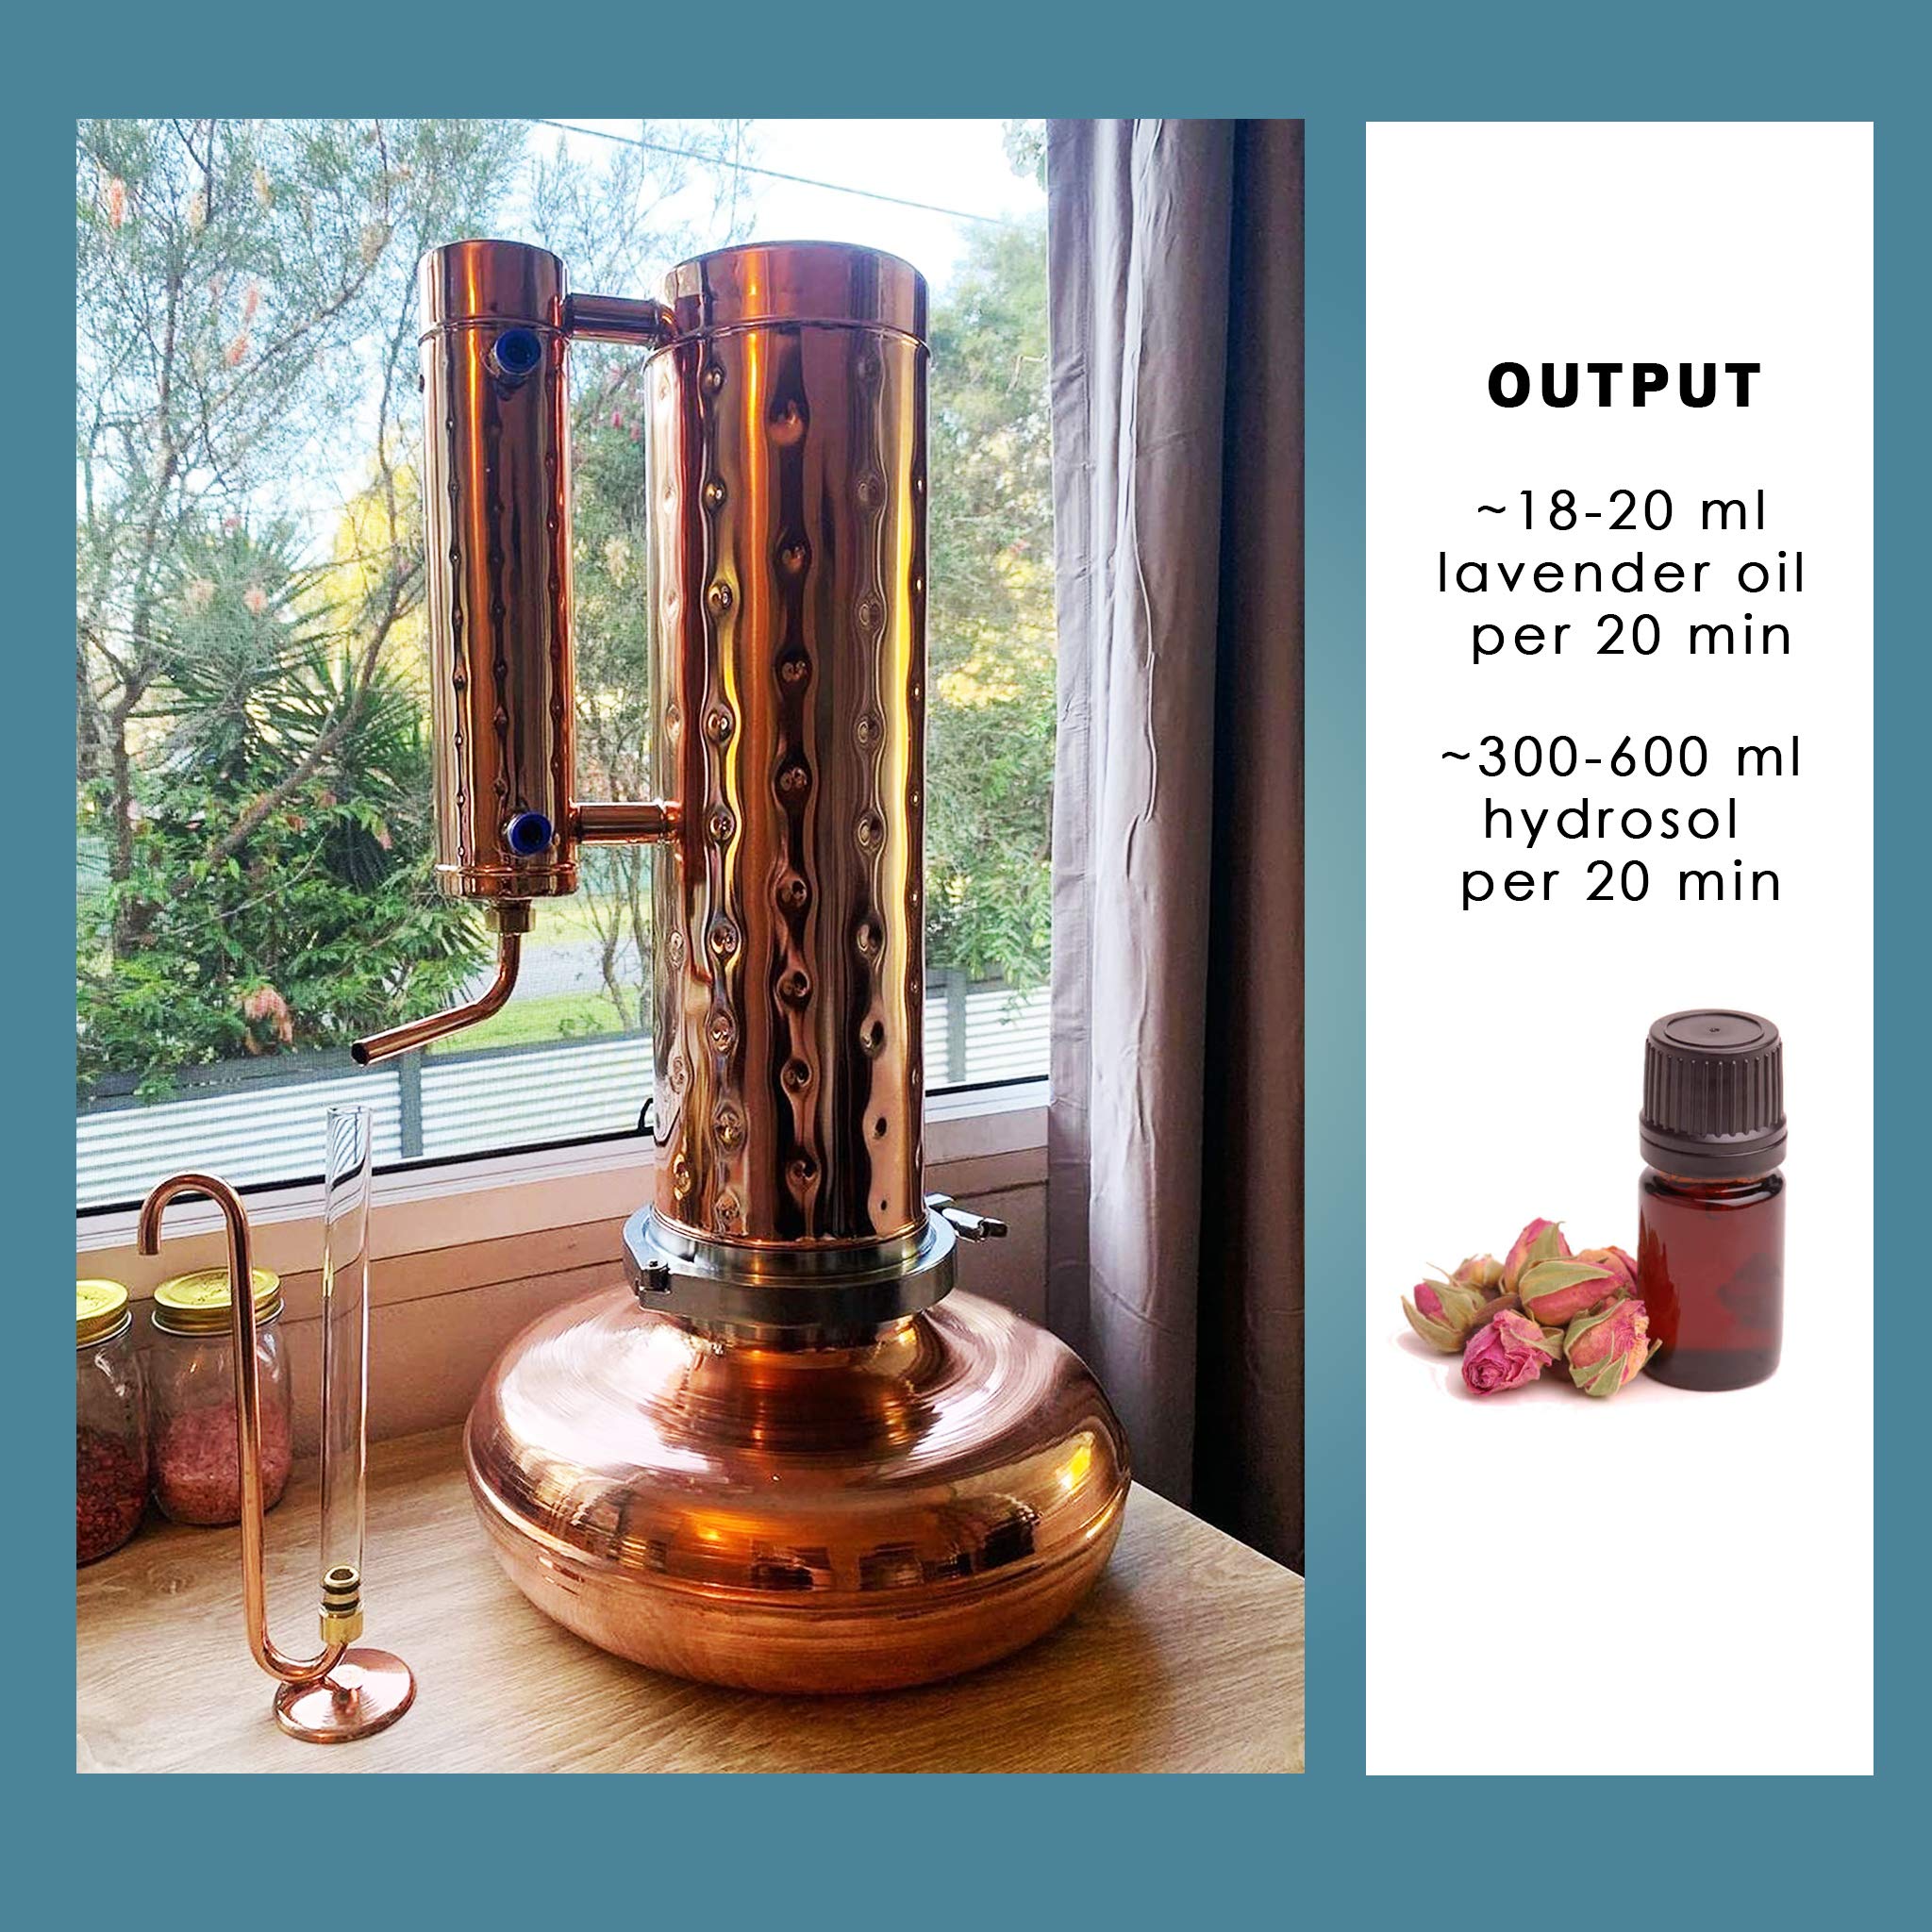 Copper Pro Essential Oil Distiller Kit for Steam Distillation Making and Extracting - Home Equipment DIY from Herbs, Plants Flowers (8L), CP5LB, 0.40 Fl Oz (Pack of 1)